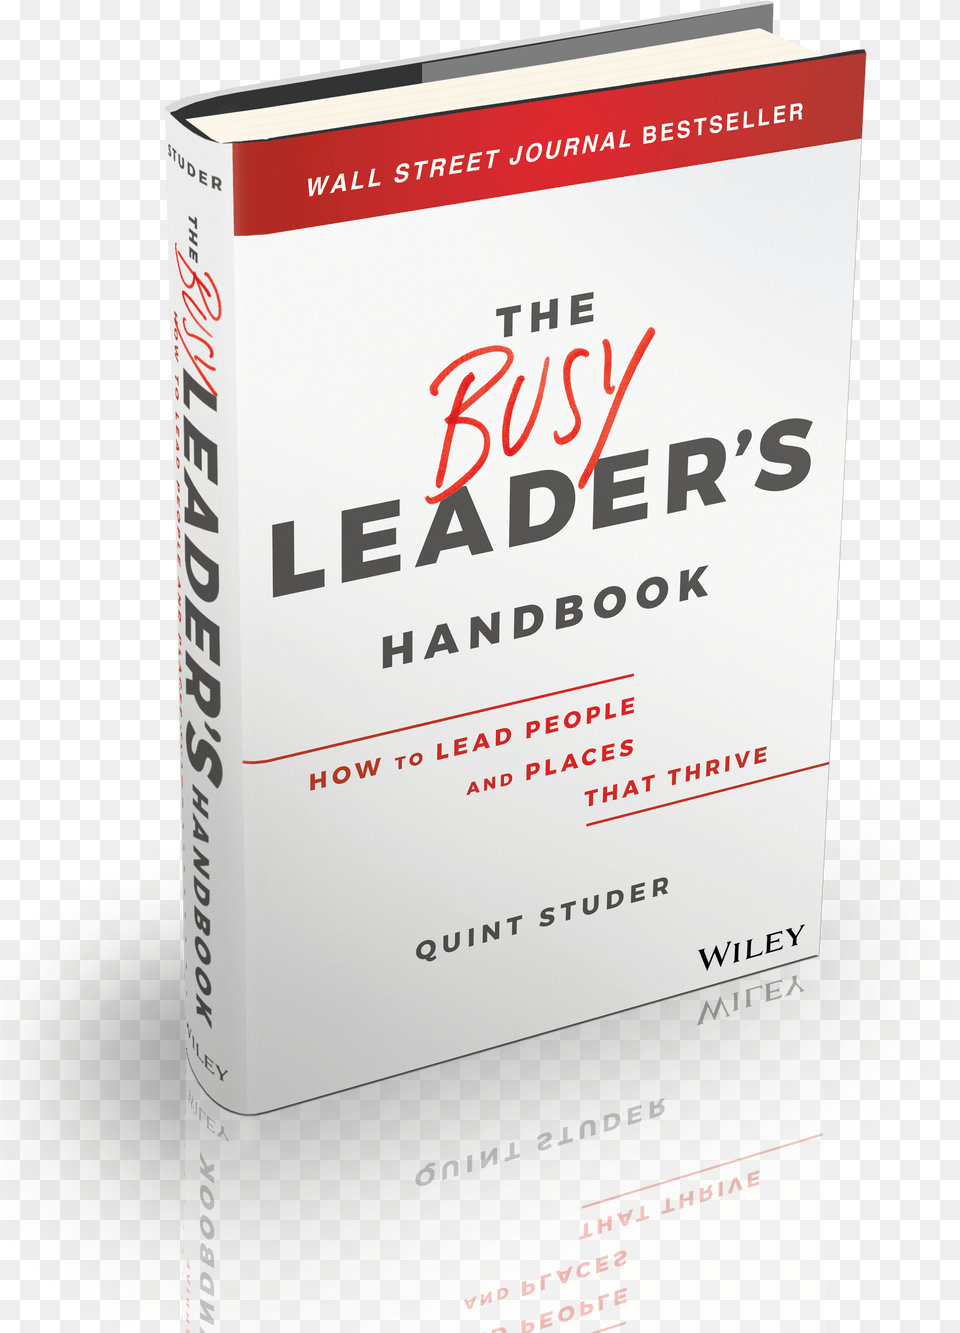 Quint Studer Busy Leaders Handbook Wall Street Journalu0027s Box, Advertisement, Poster, Book, Publication Free Png